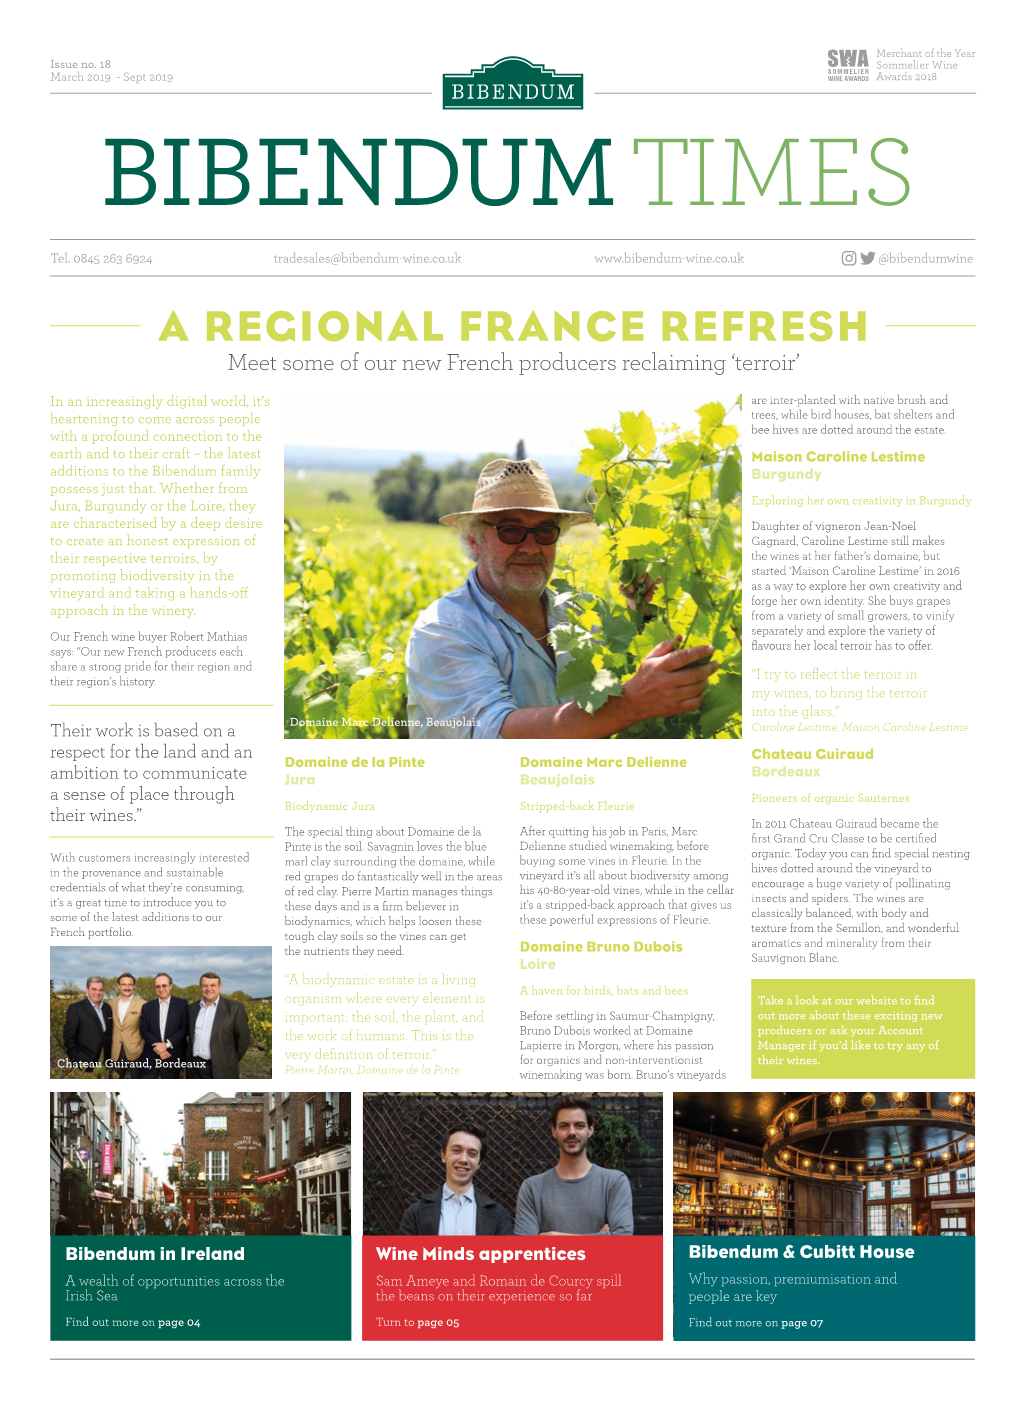 A REGIONAL FRANCE REFRESH Meet Some of Our New French Producers Reclaiming ‘Terroir’